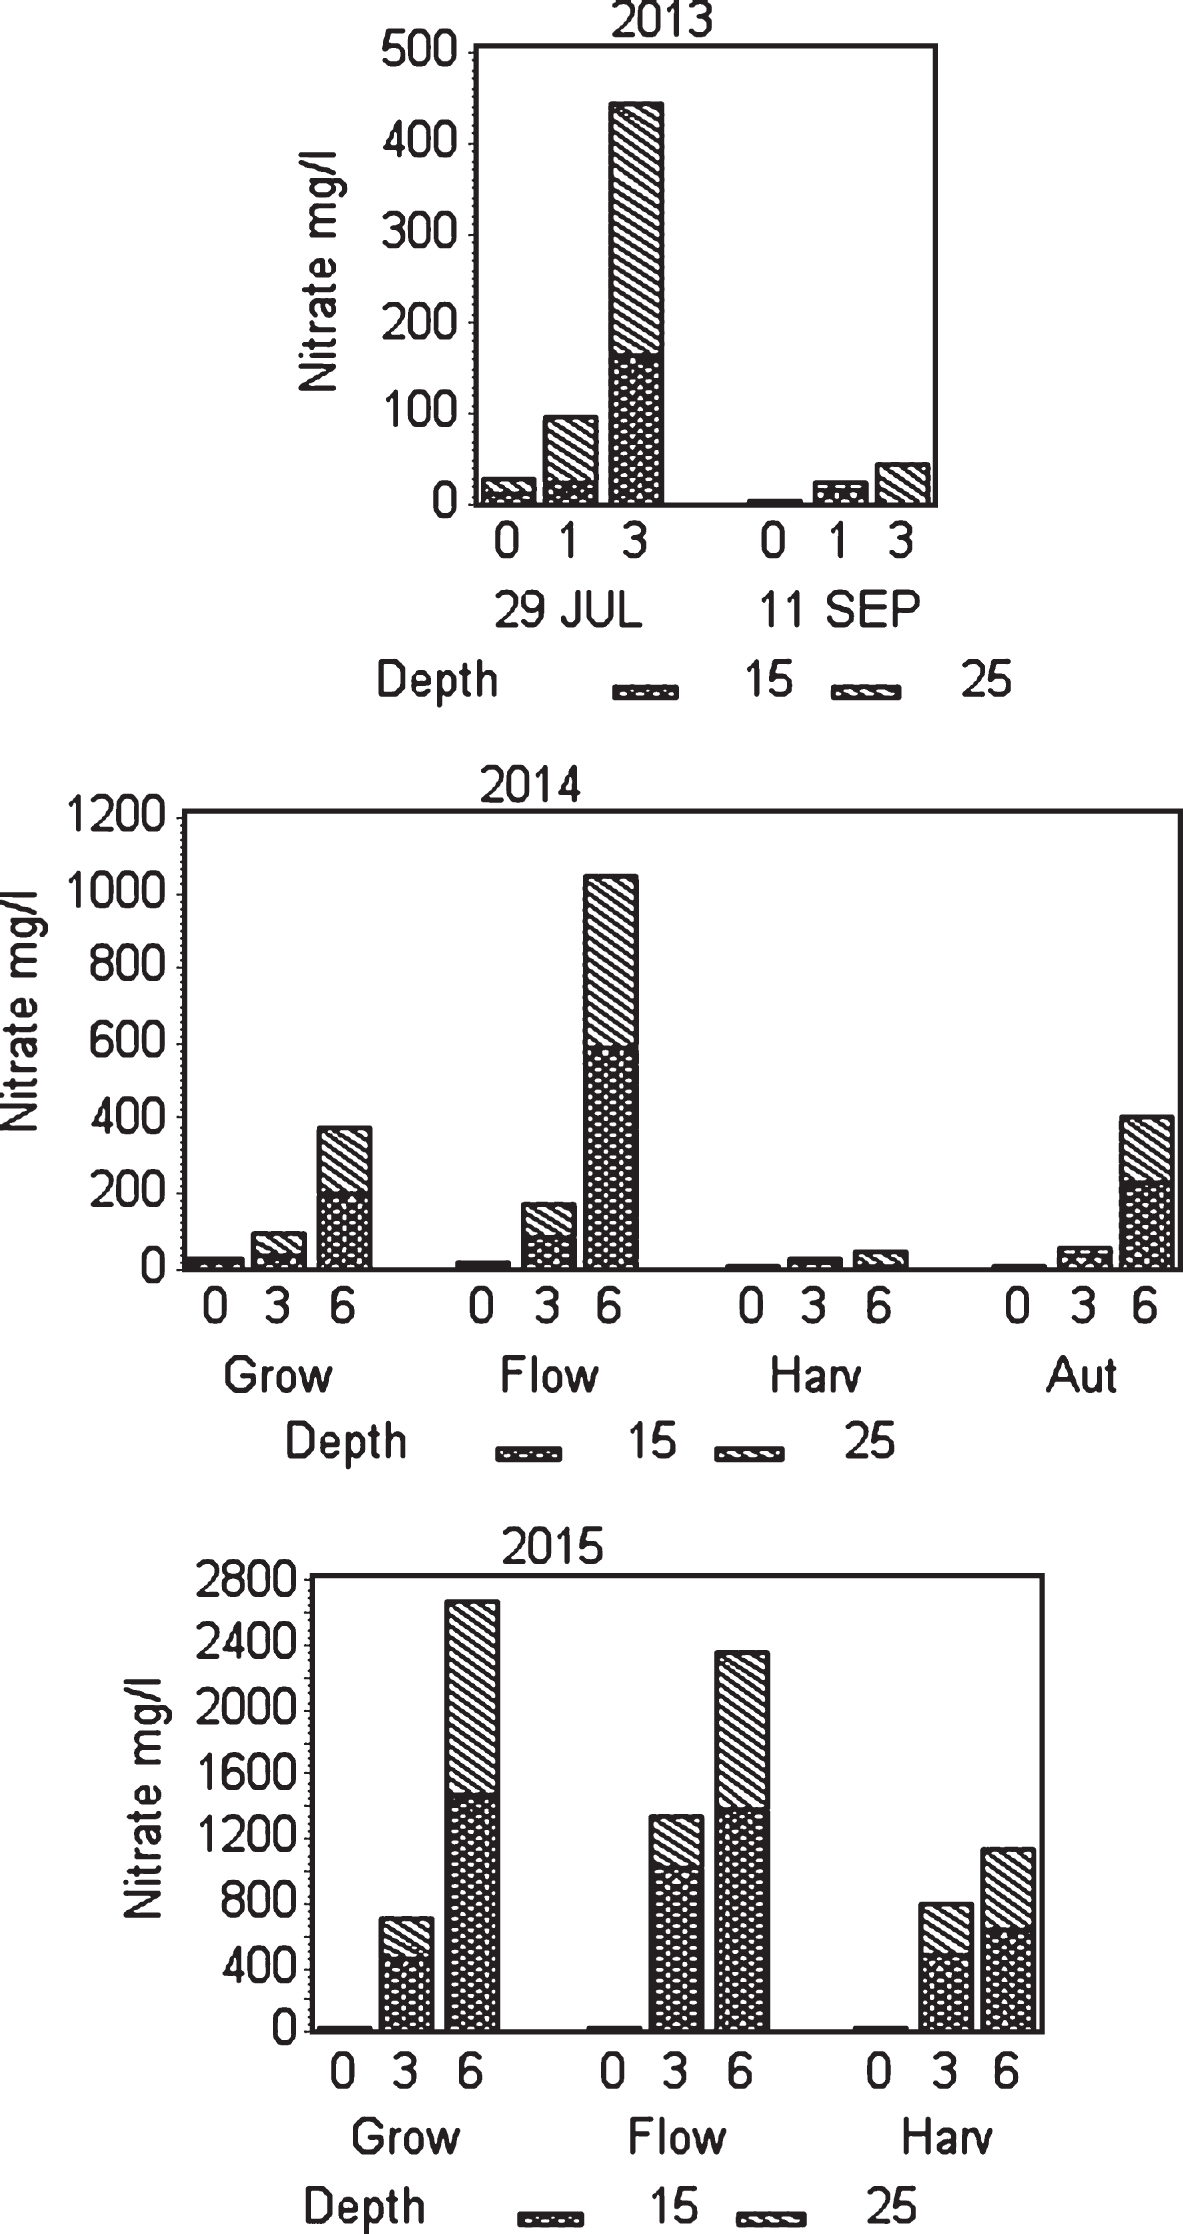 Effect of fertilization on NO3 ÷ concentration in soil water at two depths. In 2013 the sampling was taken at one date in July and one in September. In 2014 and 2015 the average of all samples in the the period before flowering (Grow), during flowering (Flow), during harvest (Harv) and after harvest (Aut) is shown. In 2015 fertilization stopped after harvest.